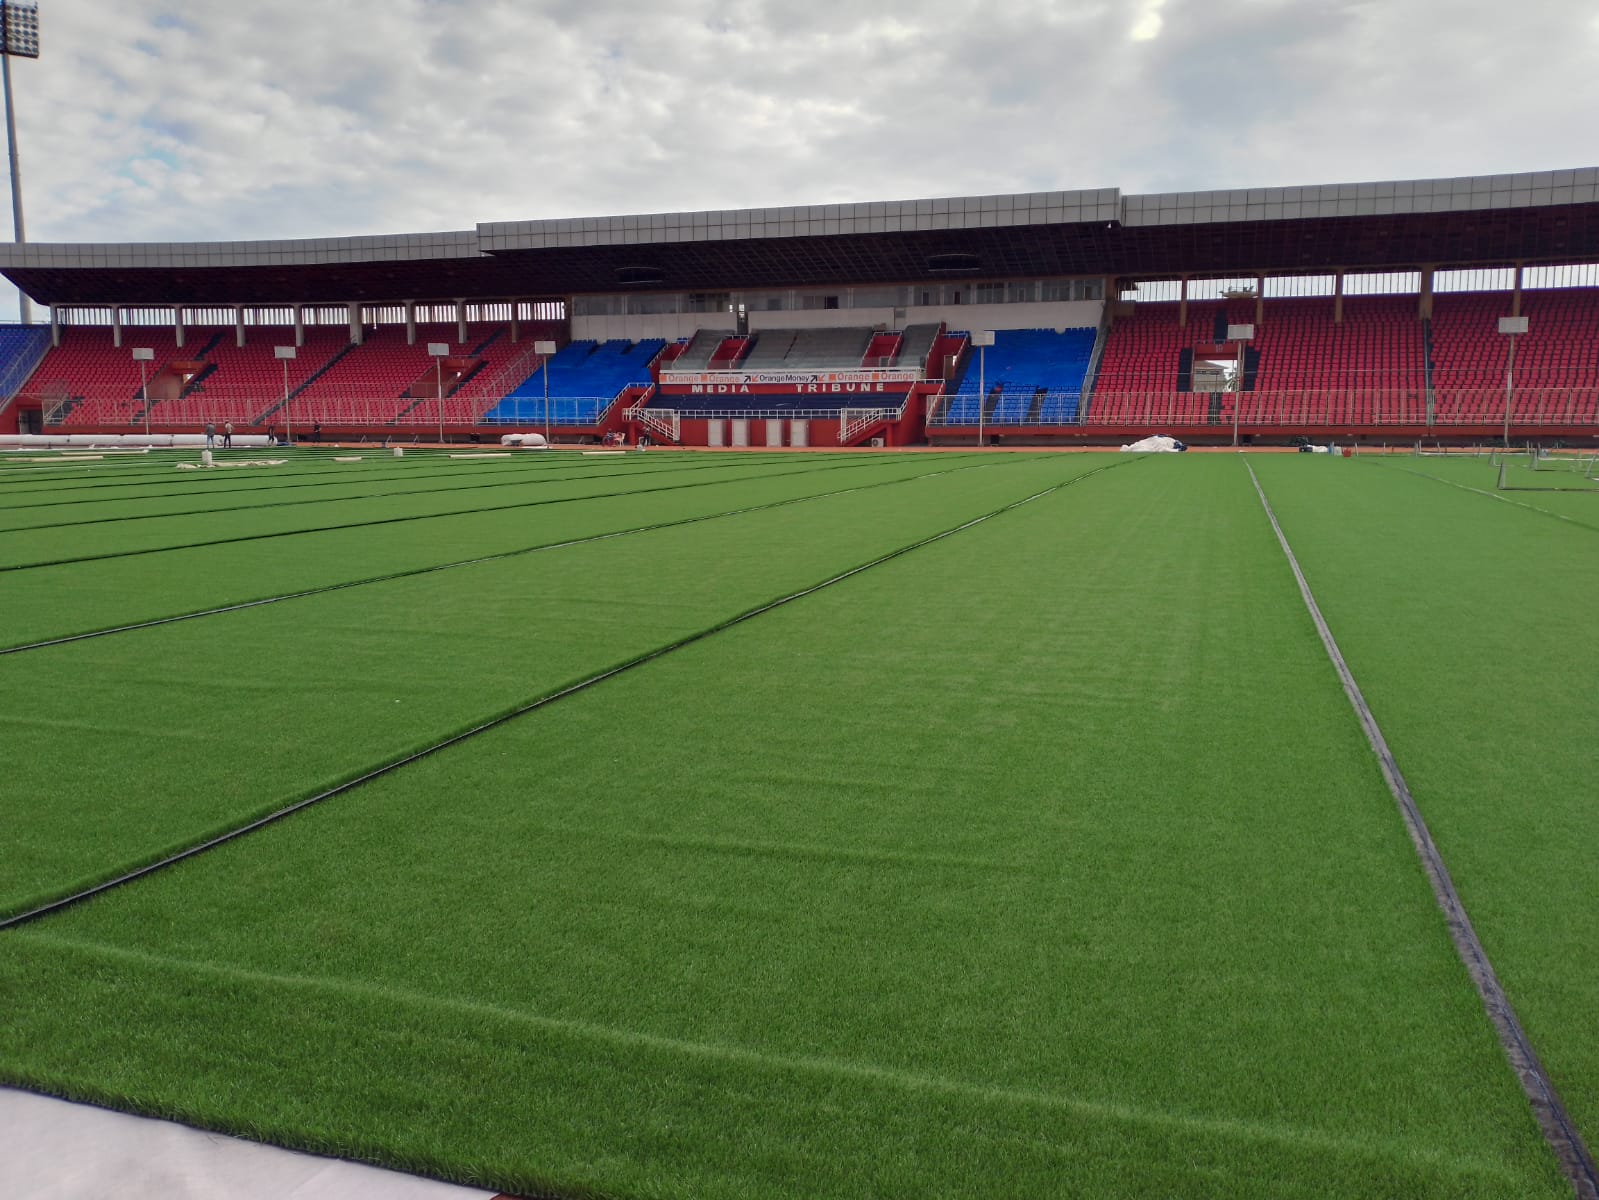 SKD experiences artificial turf for the first time